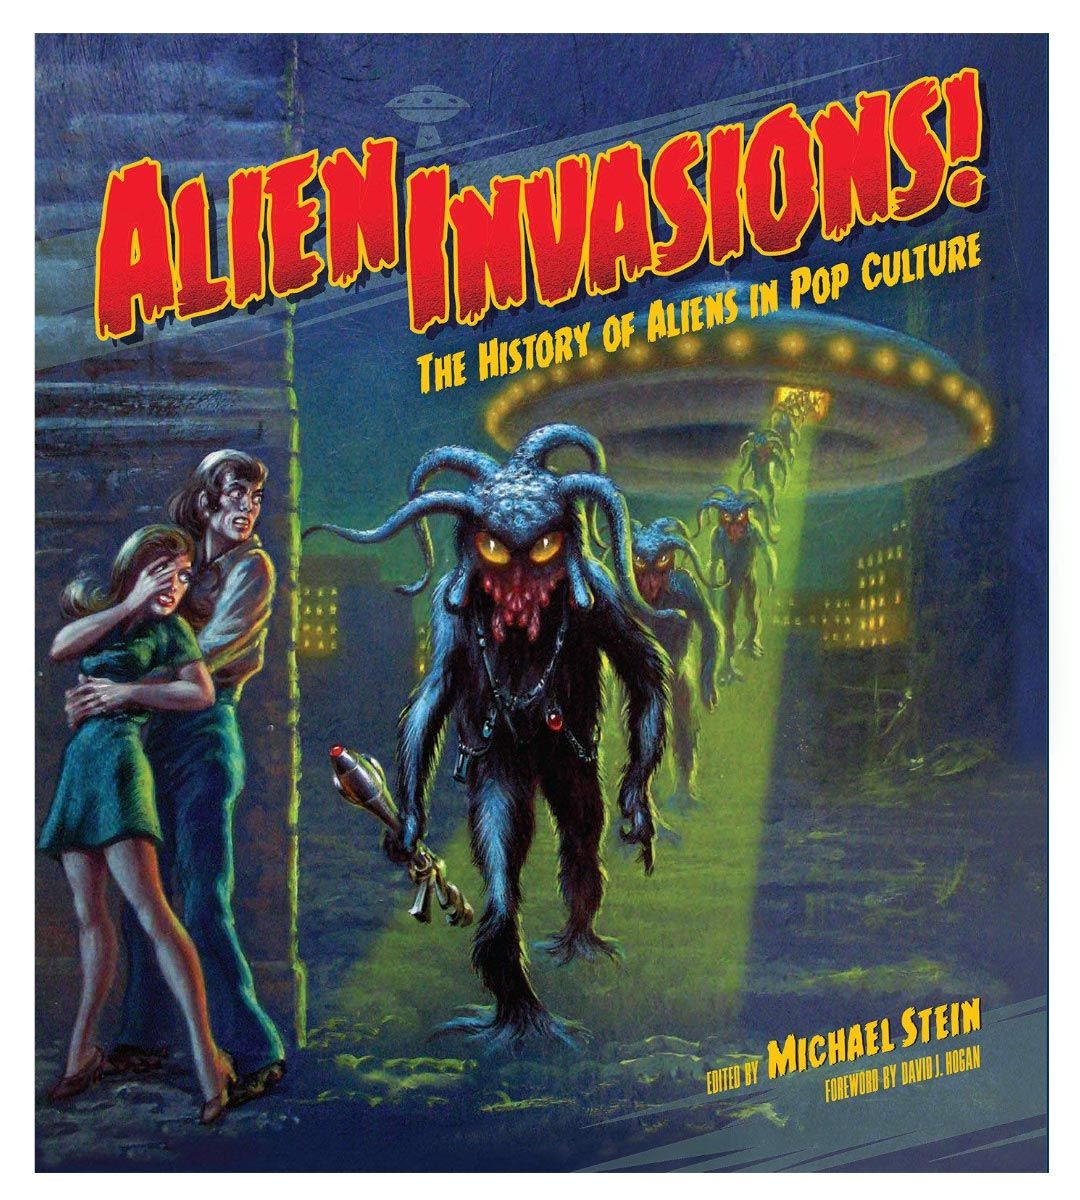 Alien invasions ! - The history of aliens in pop culture